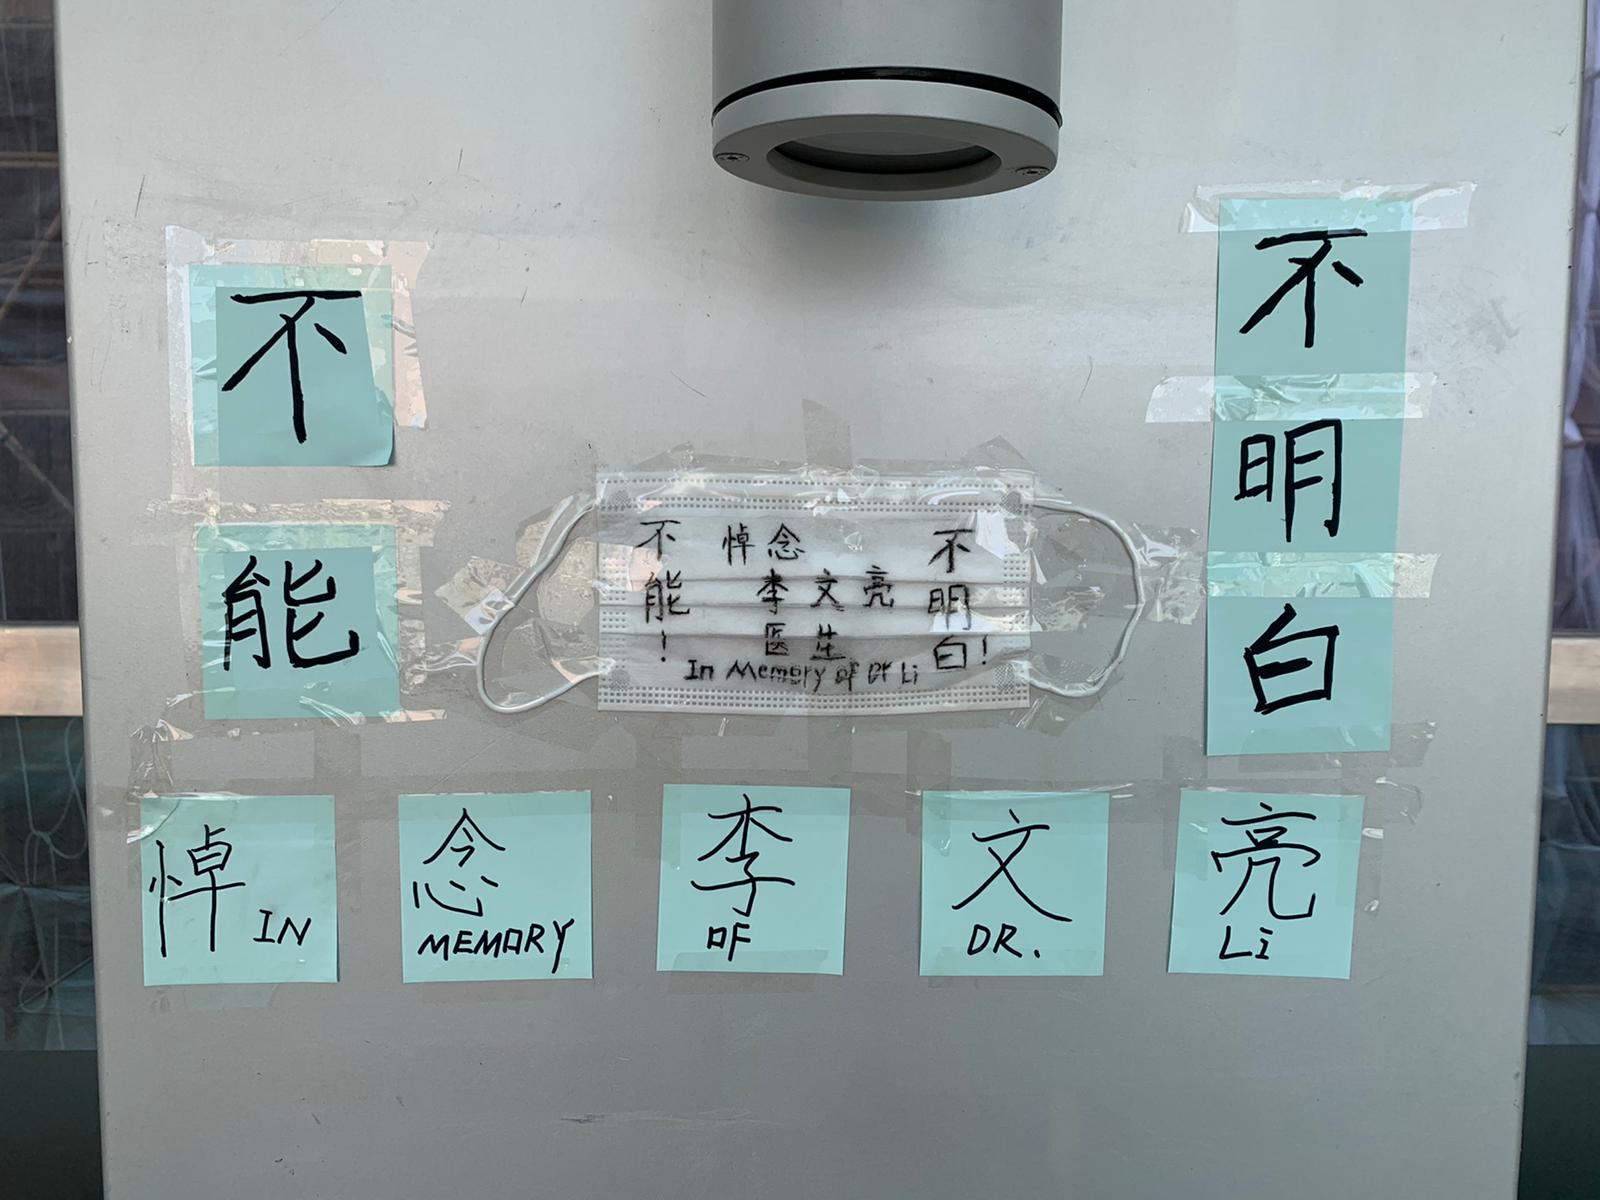 Image depicting a small memorial for Dr. Li